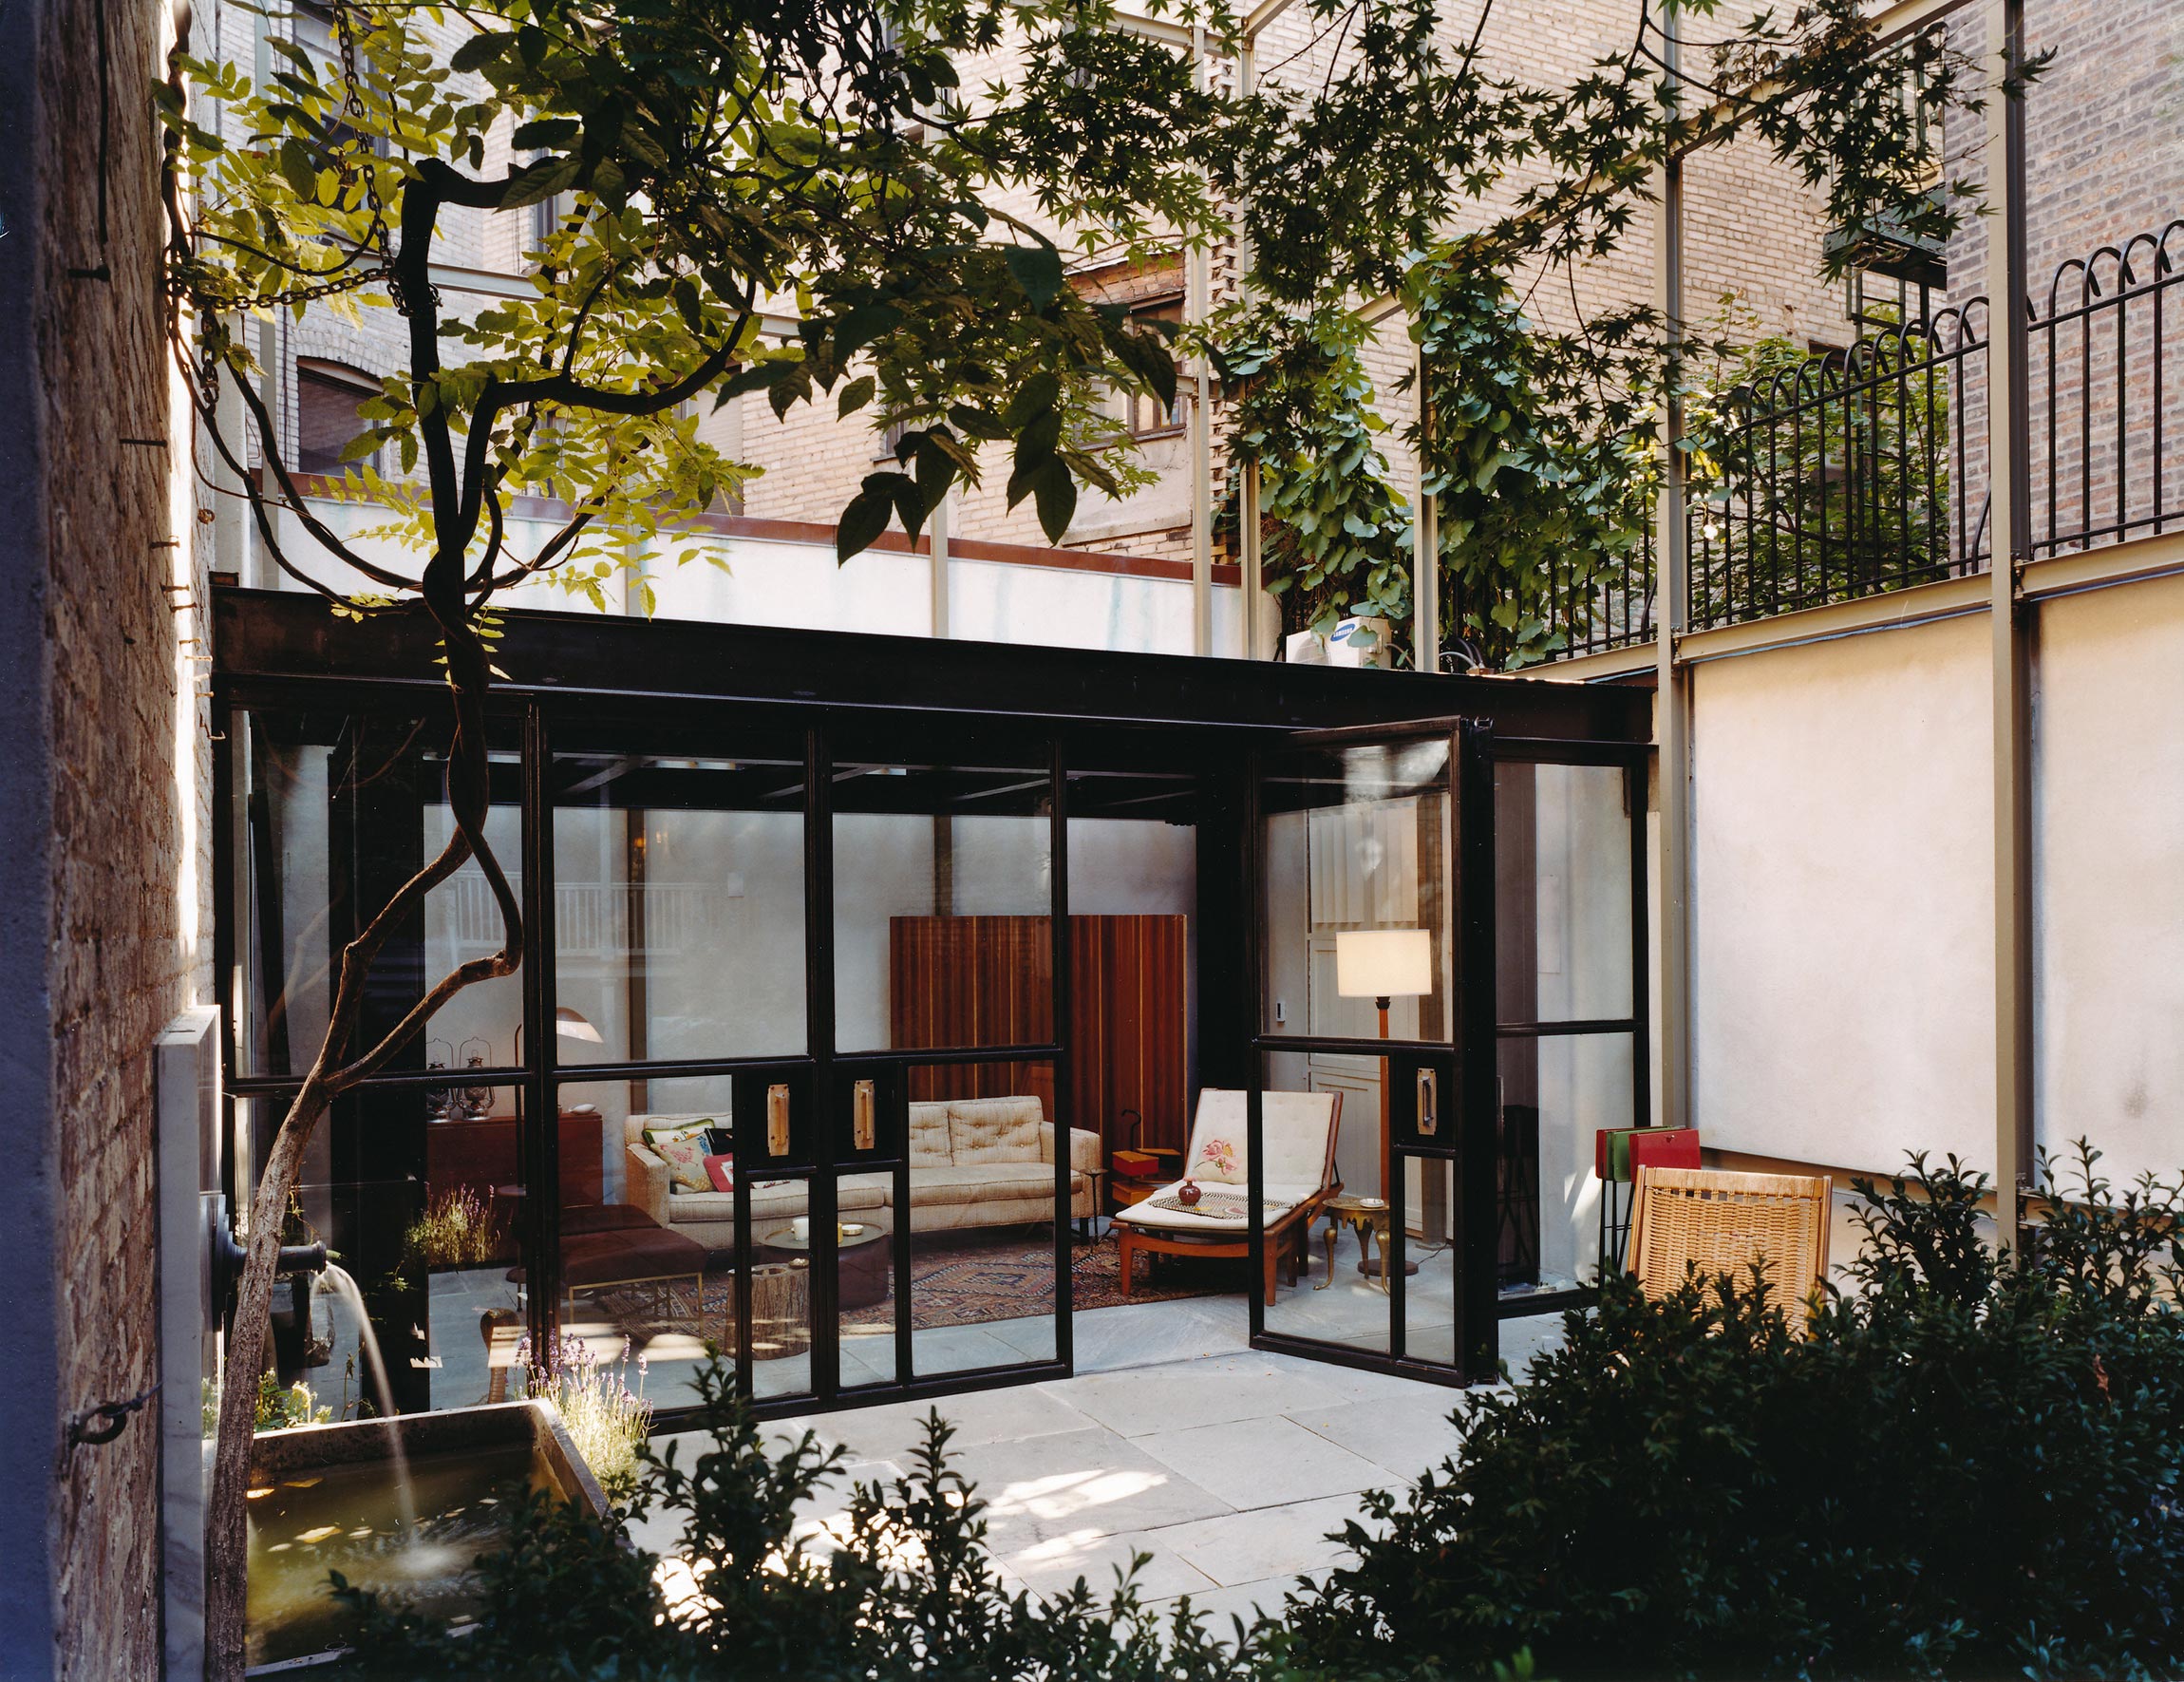 The garden pavilion in Anne Kennedy and Peter Nadin’s New York City townhouse.